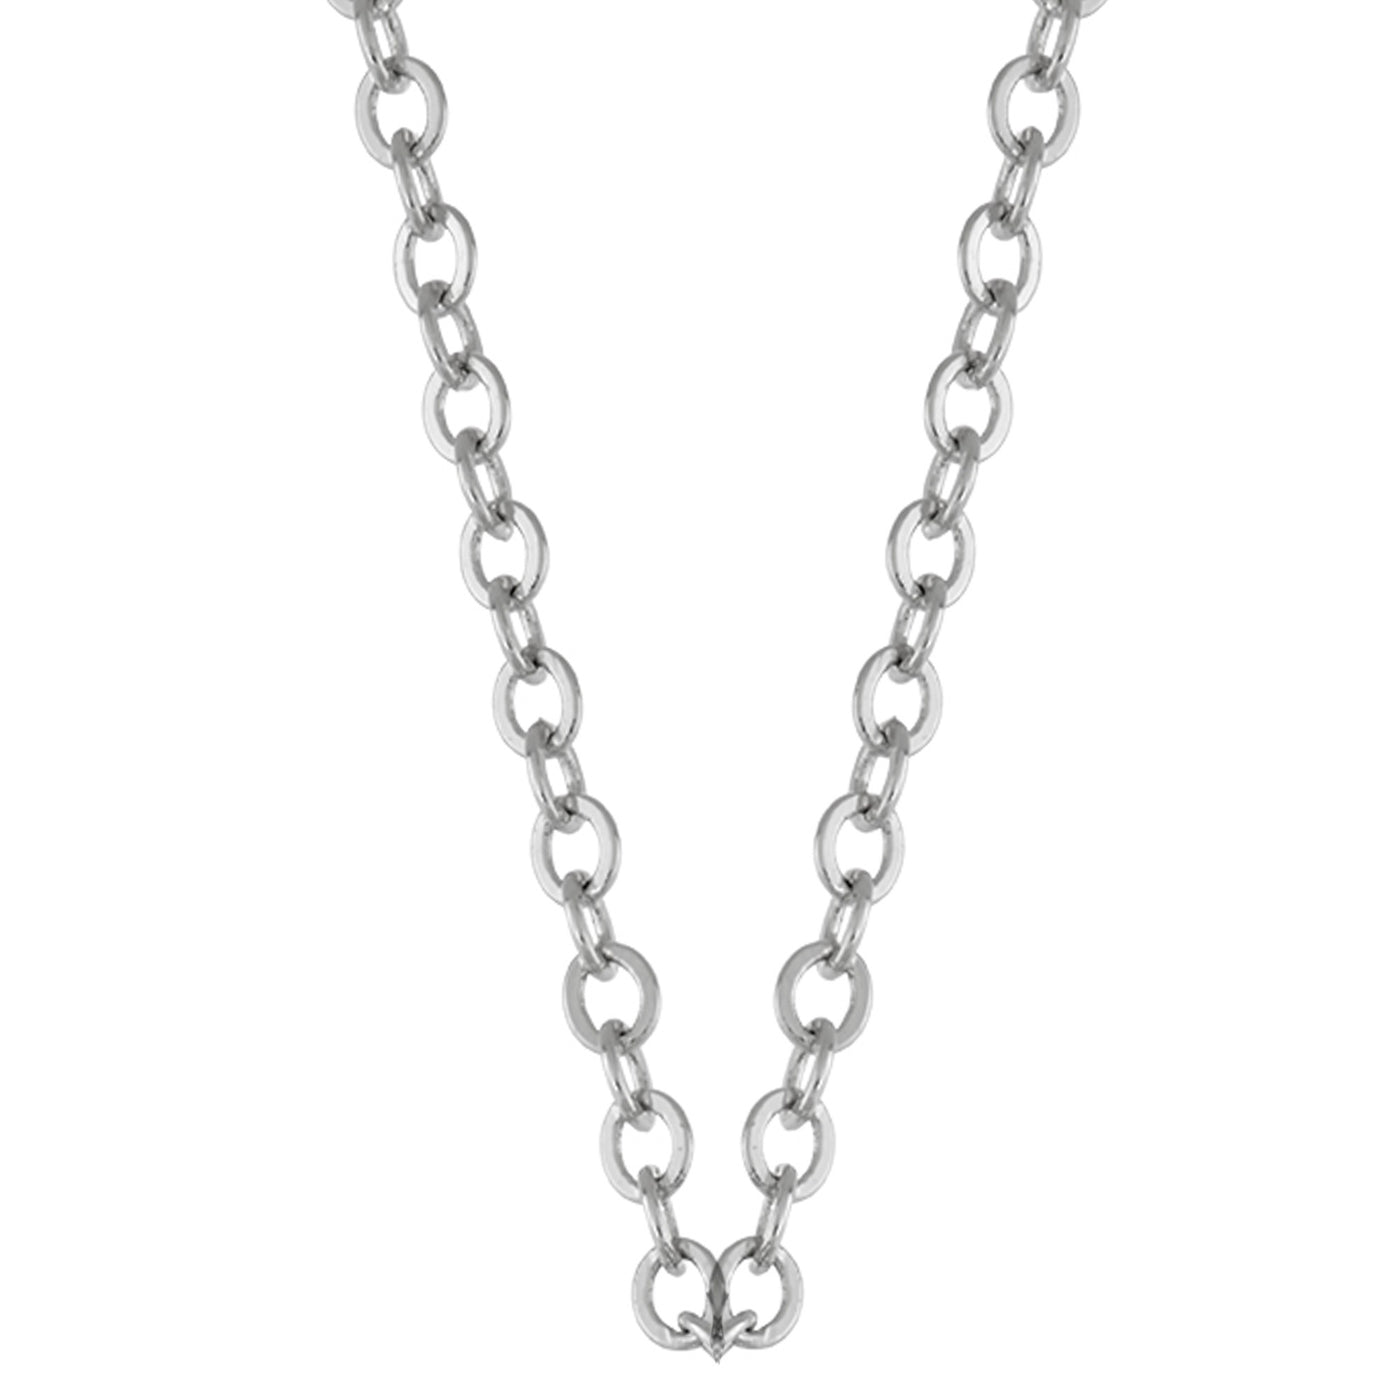 Rebecca Sloane Rhodium Plated Silver 24 inch Chain Link Necklace